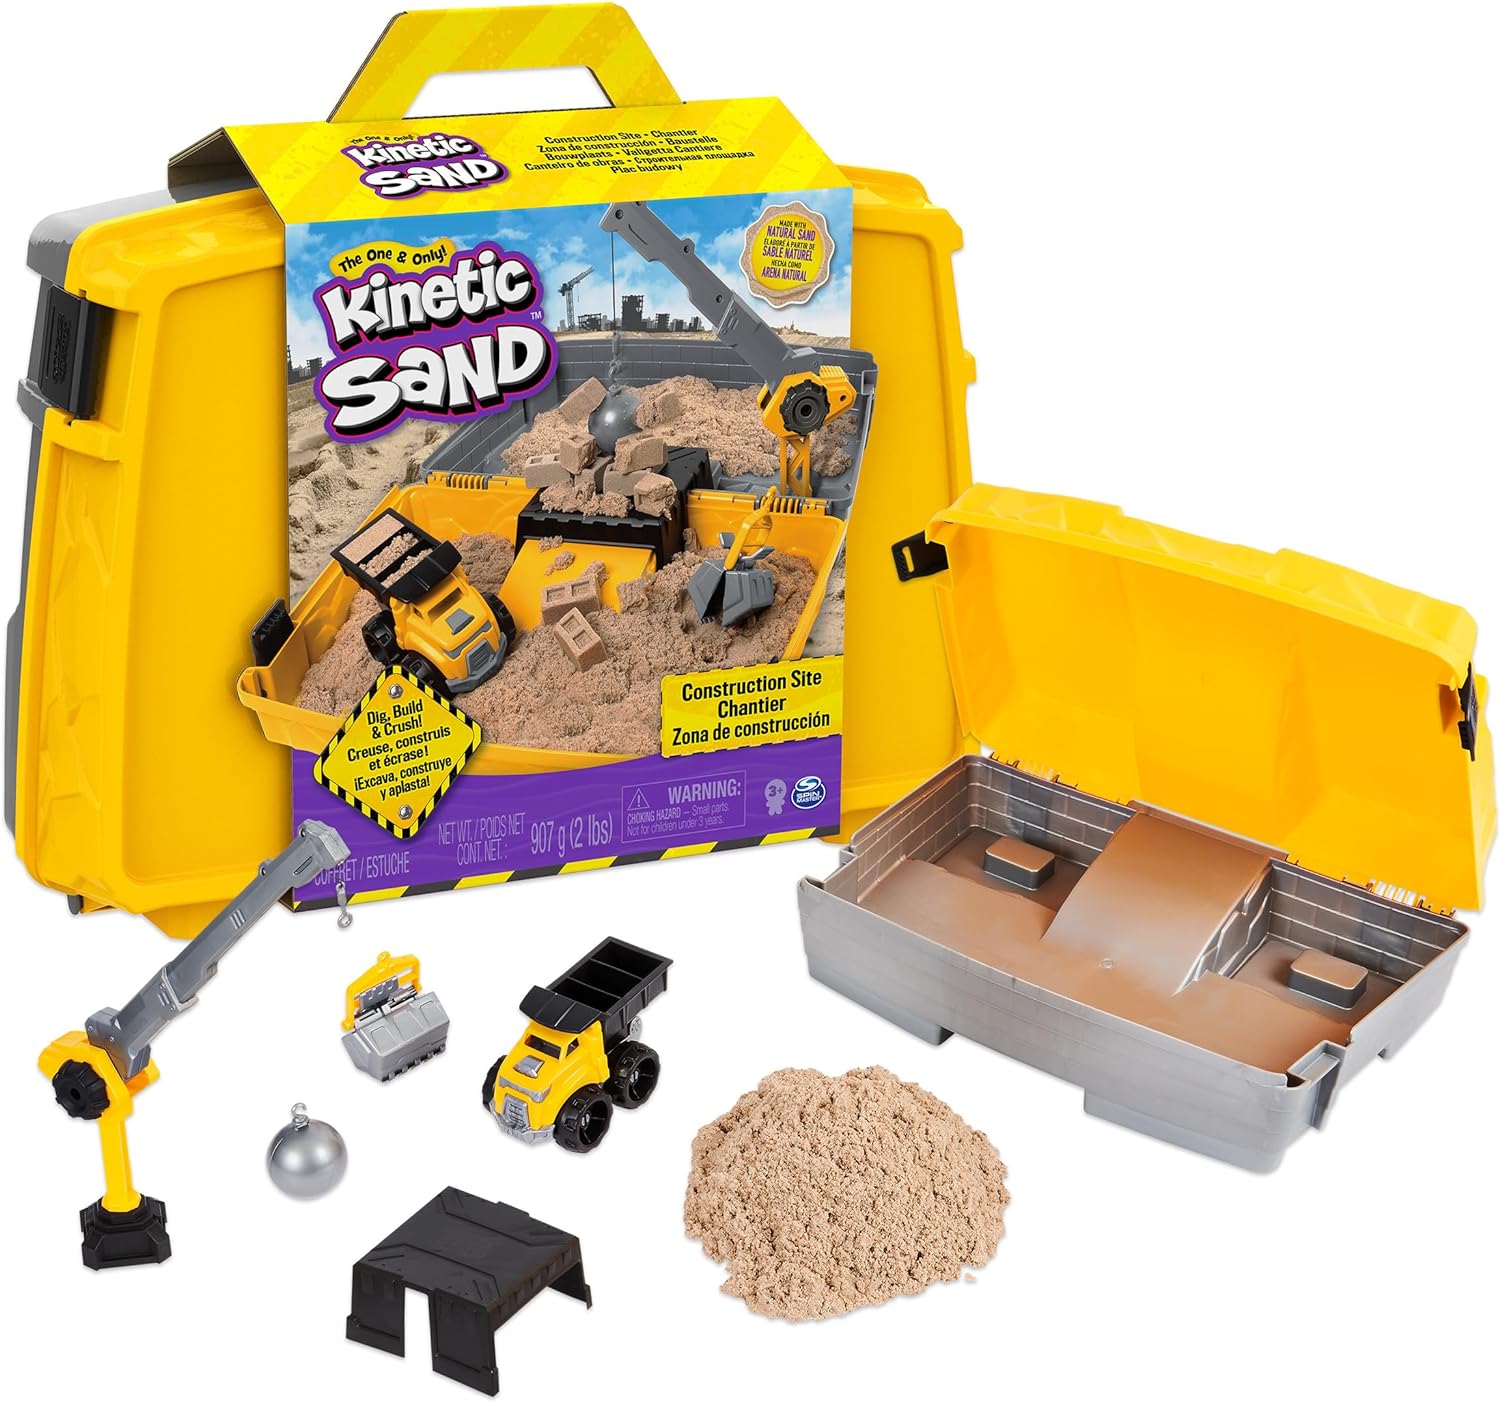 2-Lbs Kinetic Sand Construction Site Folding Sandbox w/ Toy Truck $13.71 + Free Shipping w/ Prime or $35+